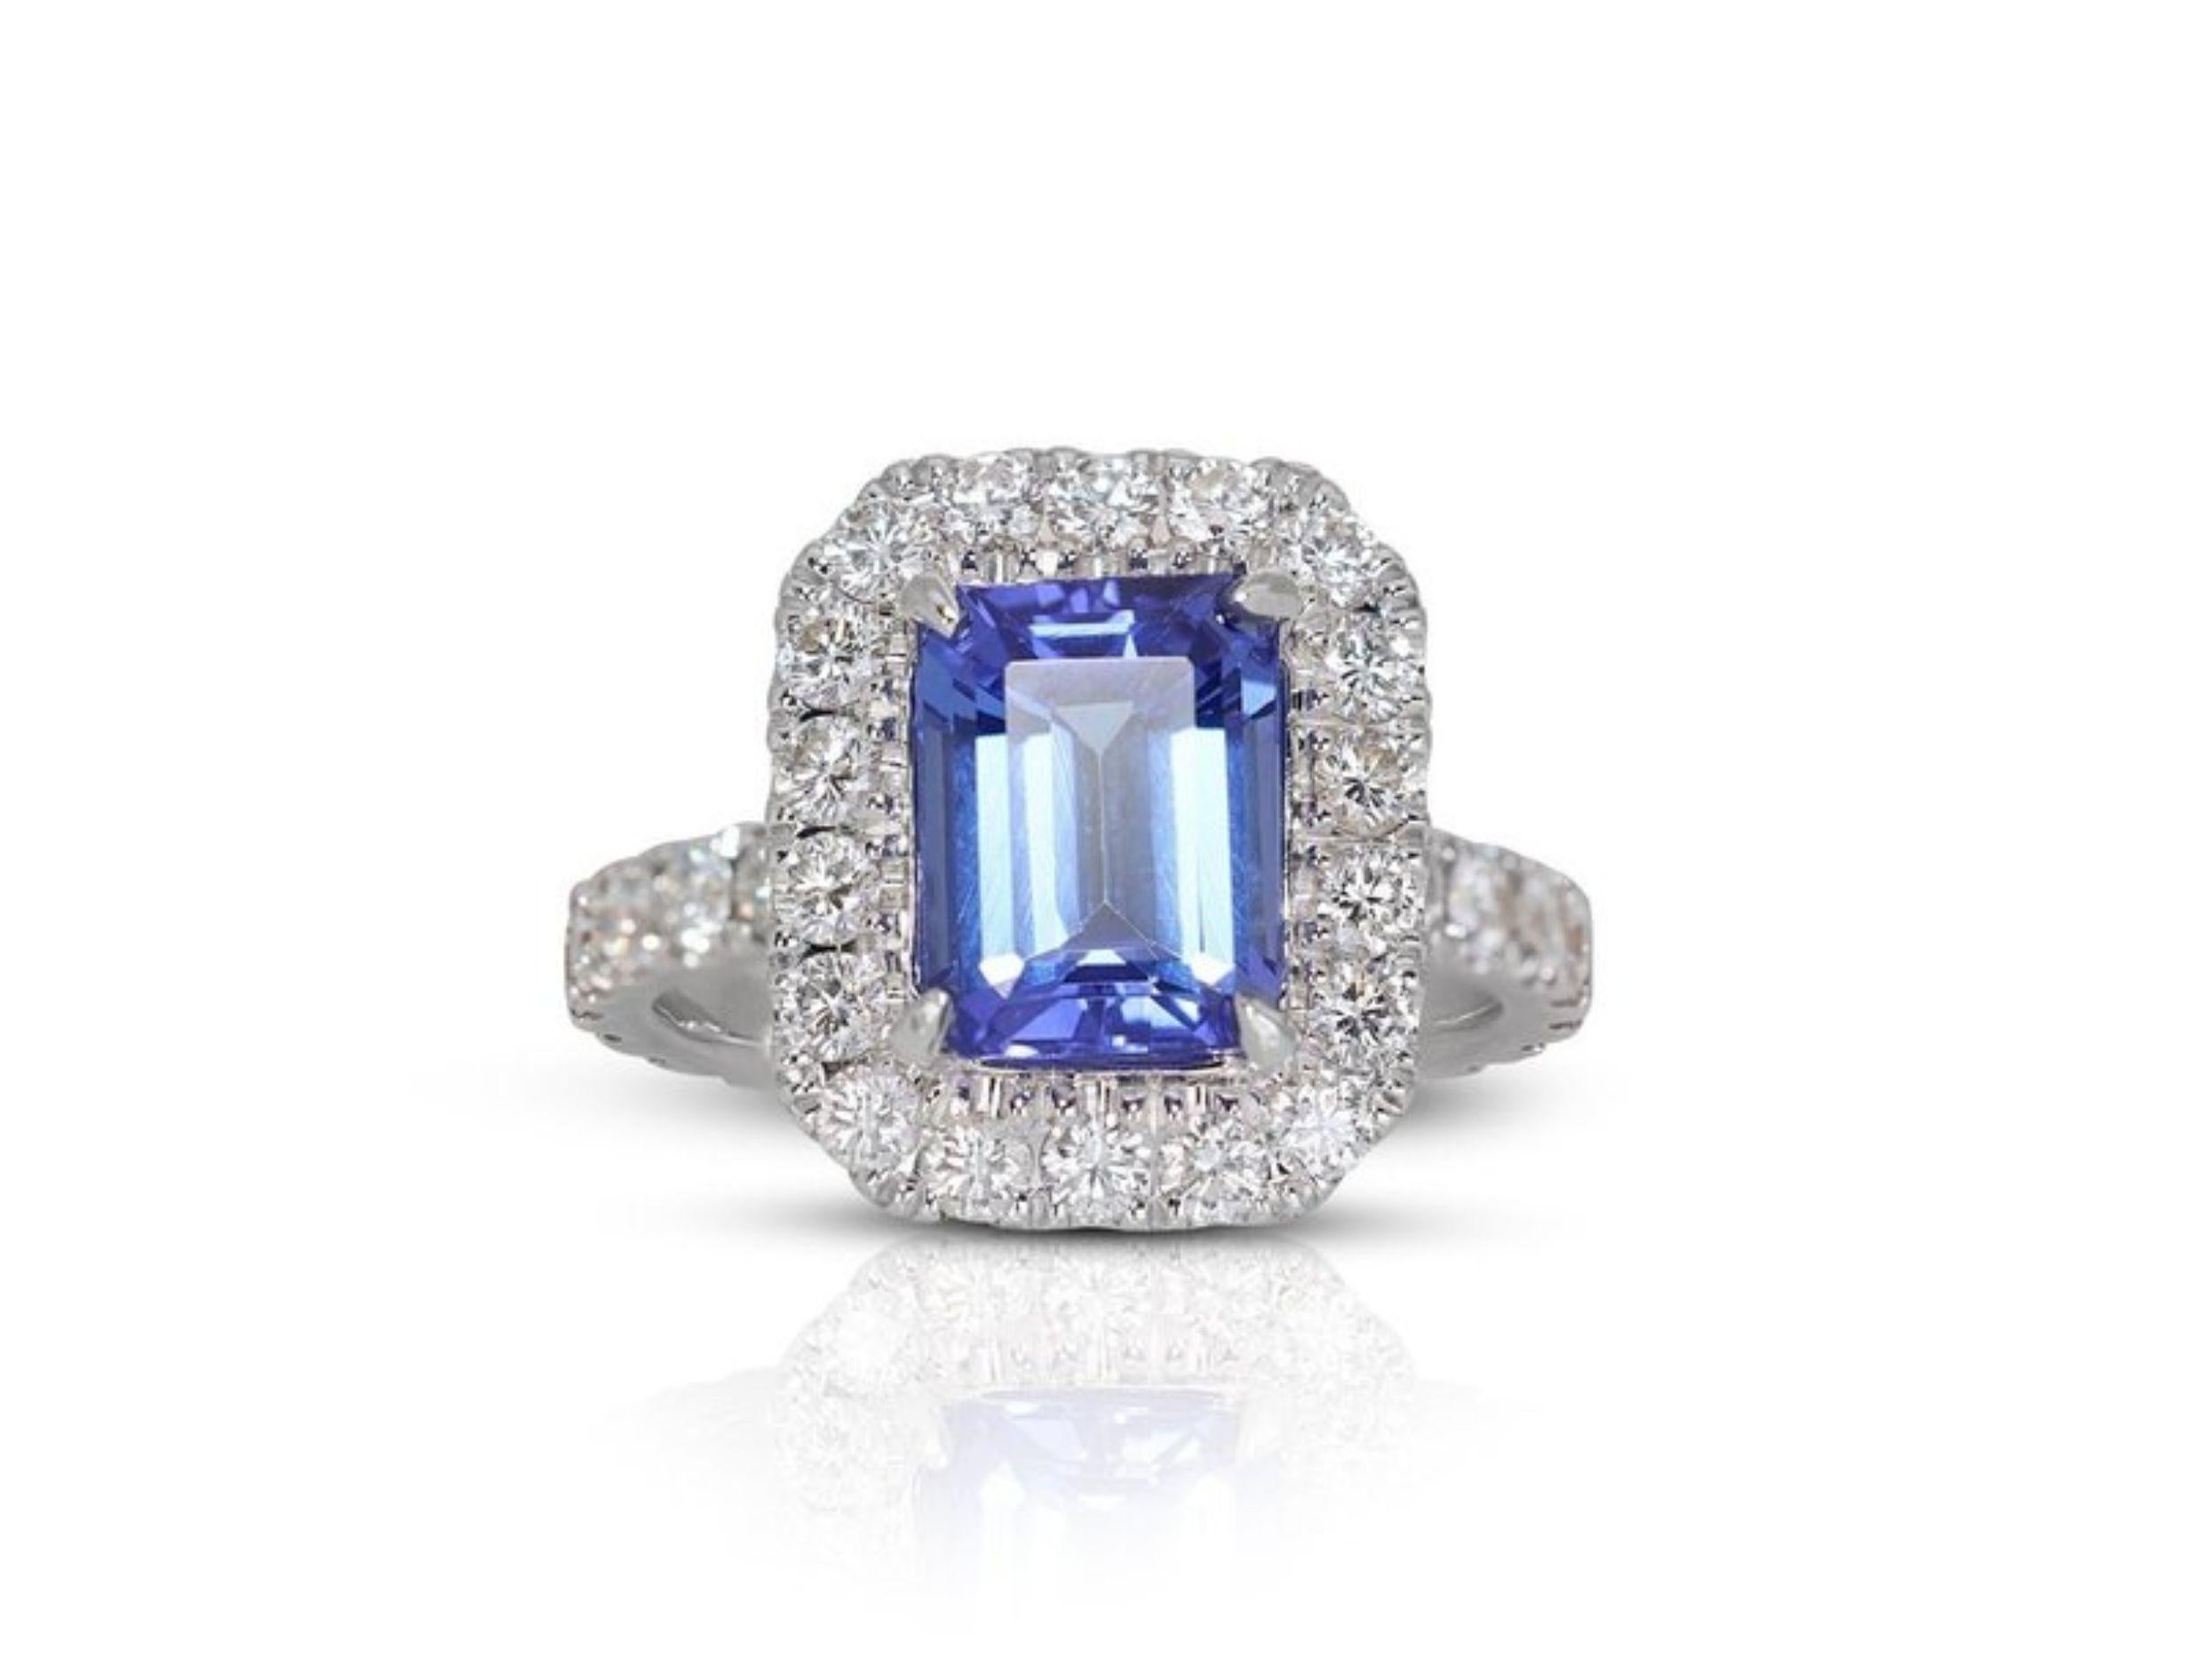 Immerse Yourself in the Ocean's Depths with This Captivating 2.5 Carat Emerald Tanzanite Ring
This ring is a breathtaking vision of the ocean's depths, where a mesmerizing 2.5 carat emerald cut tanzanite reigns supreme. Its captivating violetish